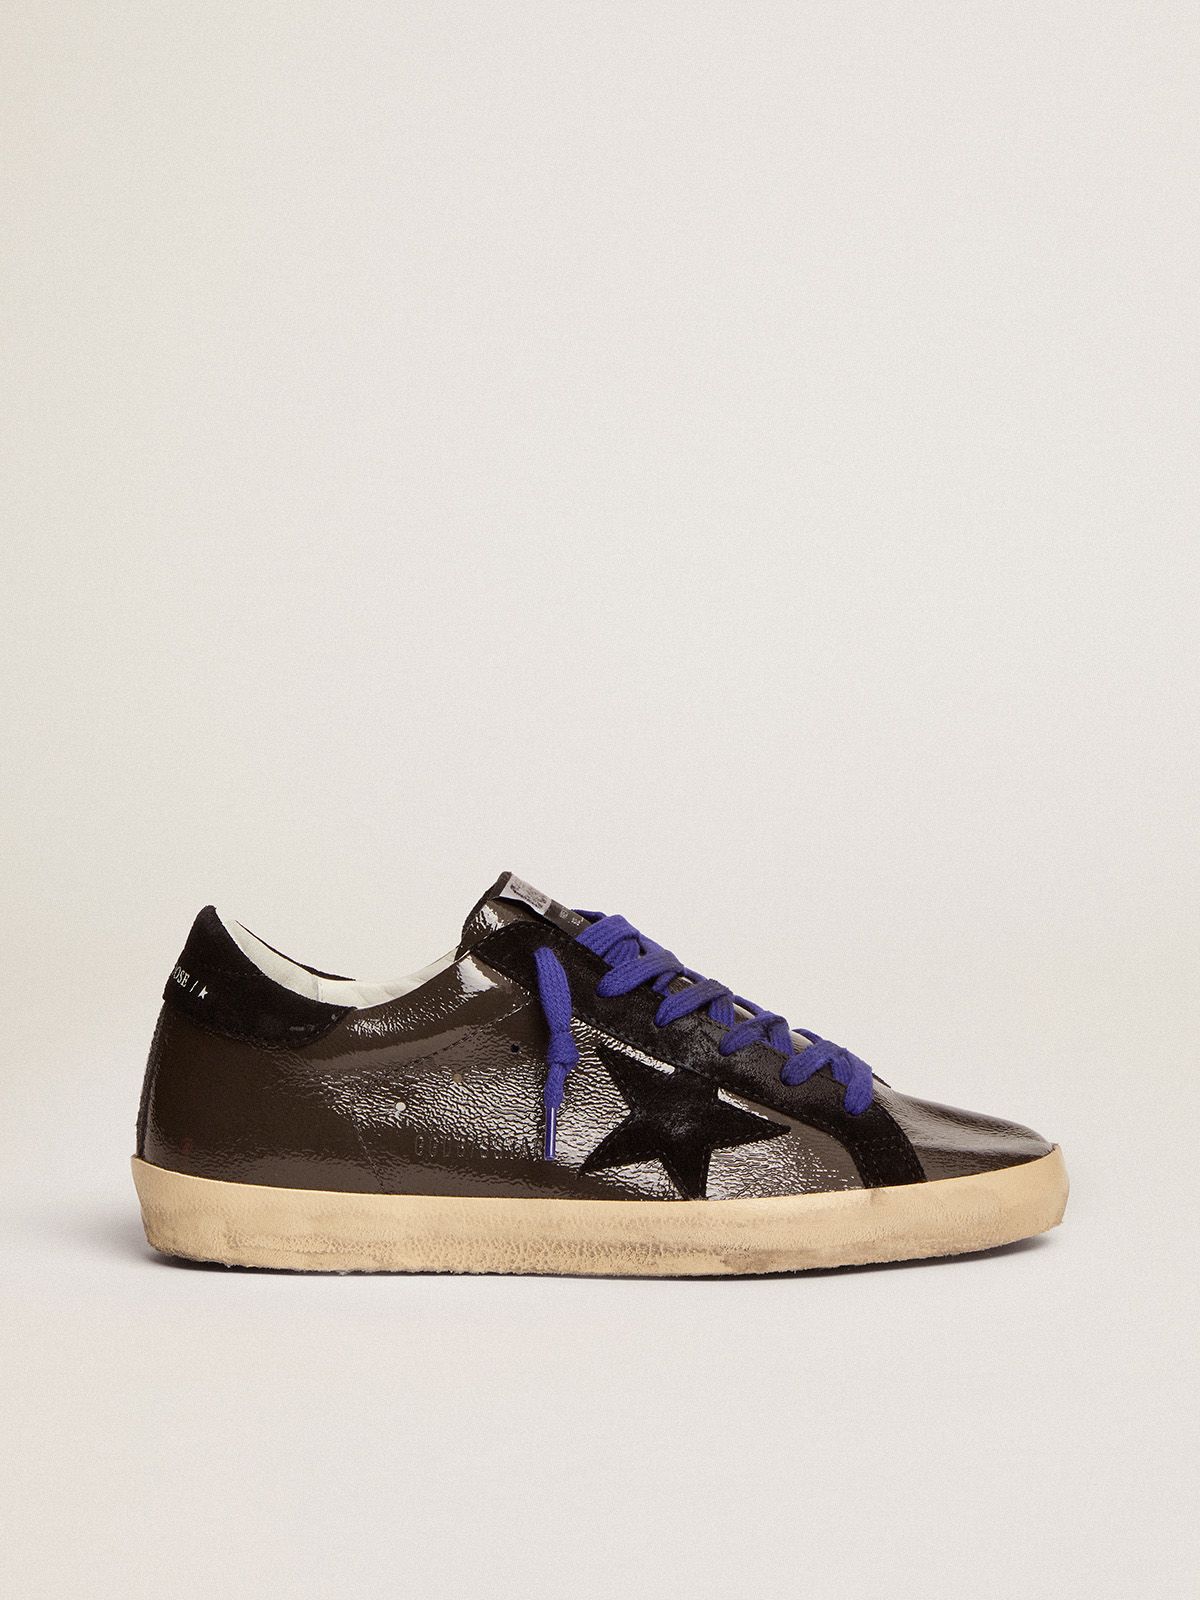 Super-Star sneakers in gray patent leather with black suede inserts